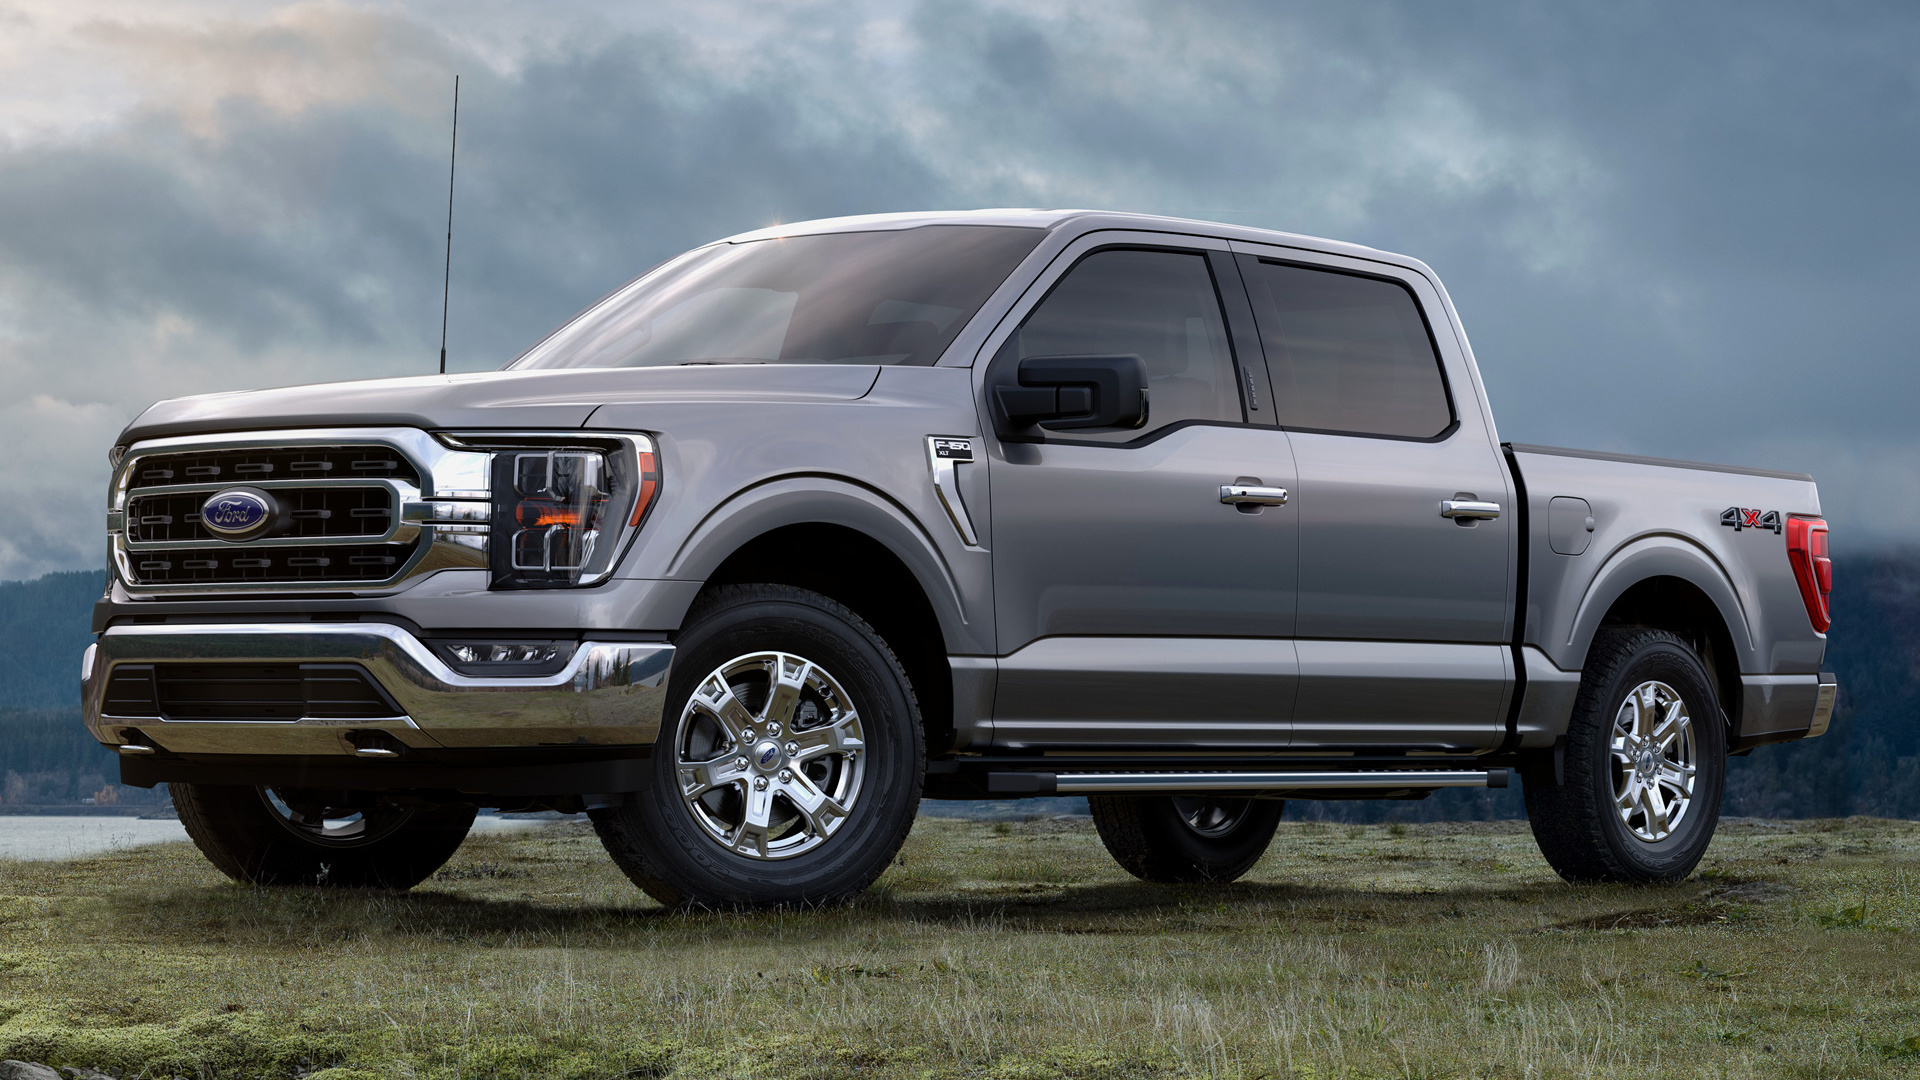 Ford F-150, Iconic pickup truck, Captivating wallpapers, Power and performance, 1920x1080 Full HD Desktop